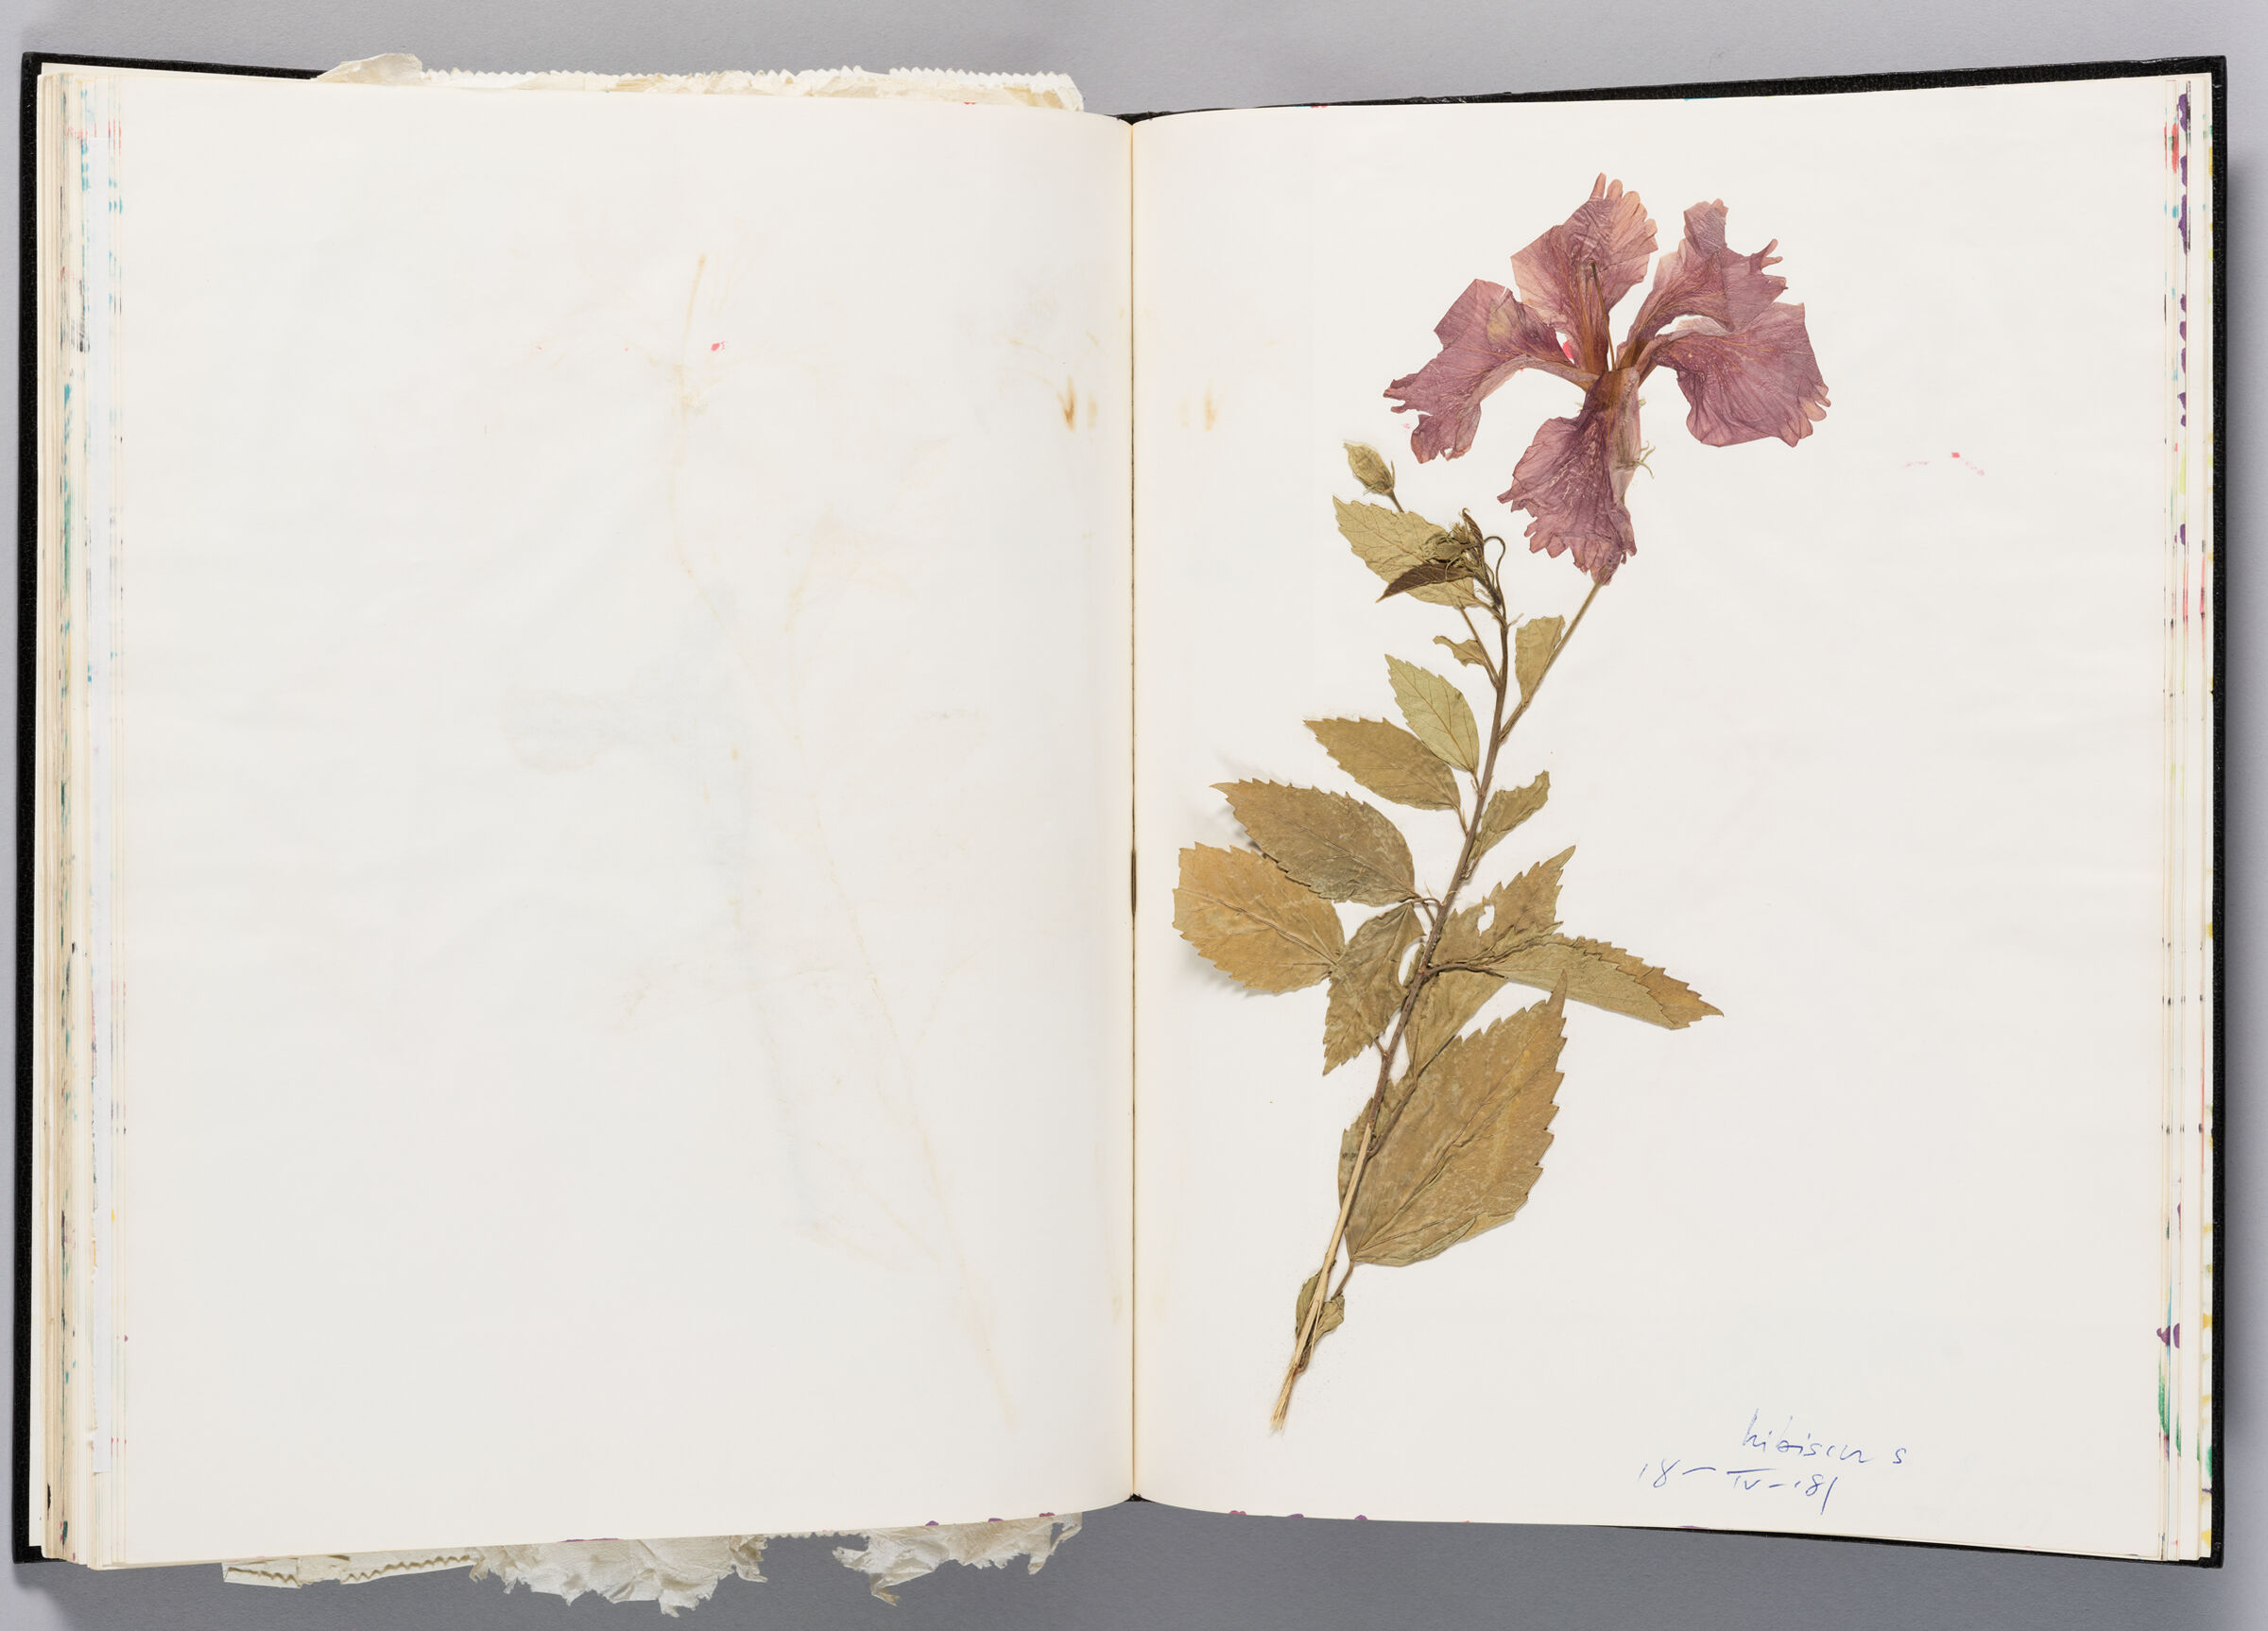 Untitled (Blank, Left Page); Untitled (Pressed Hibiscus, Right Page)
